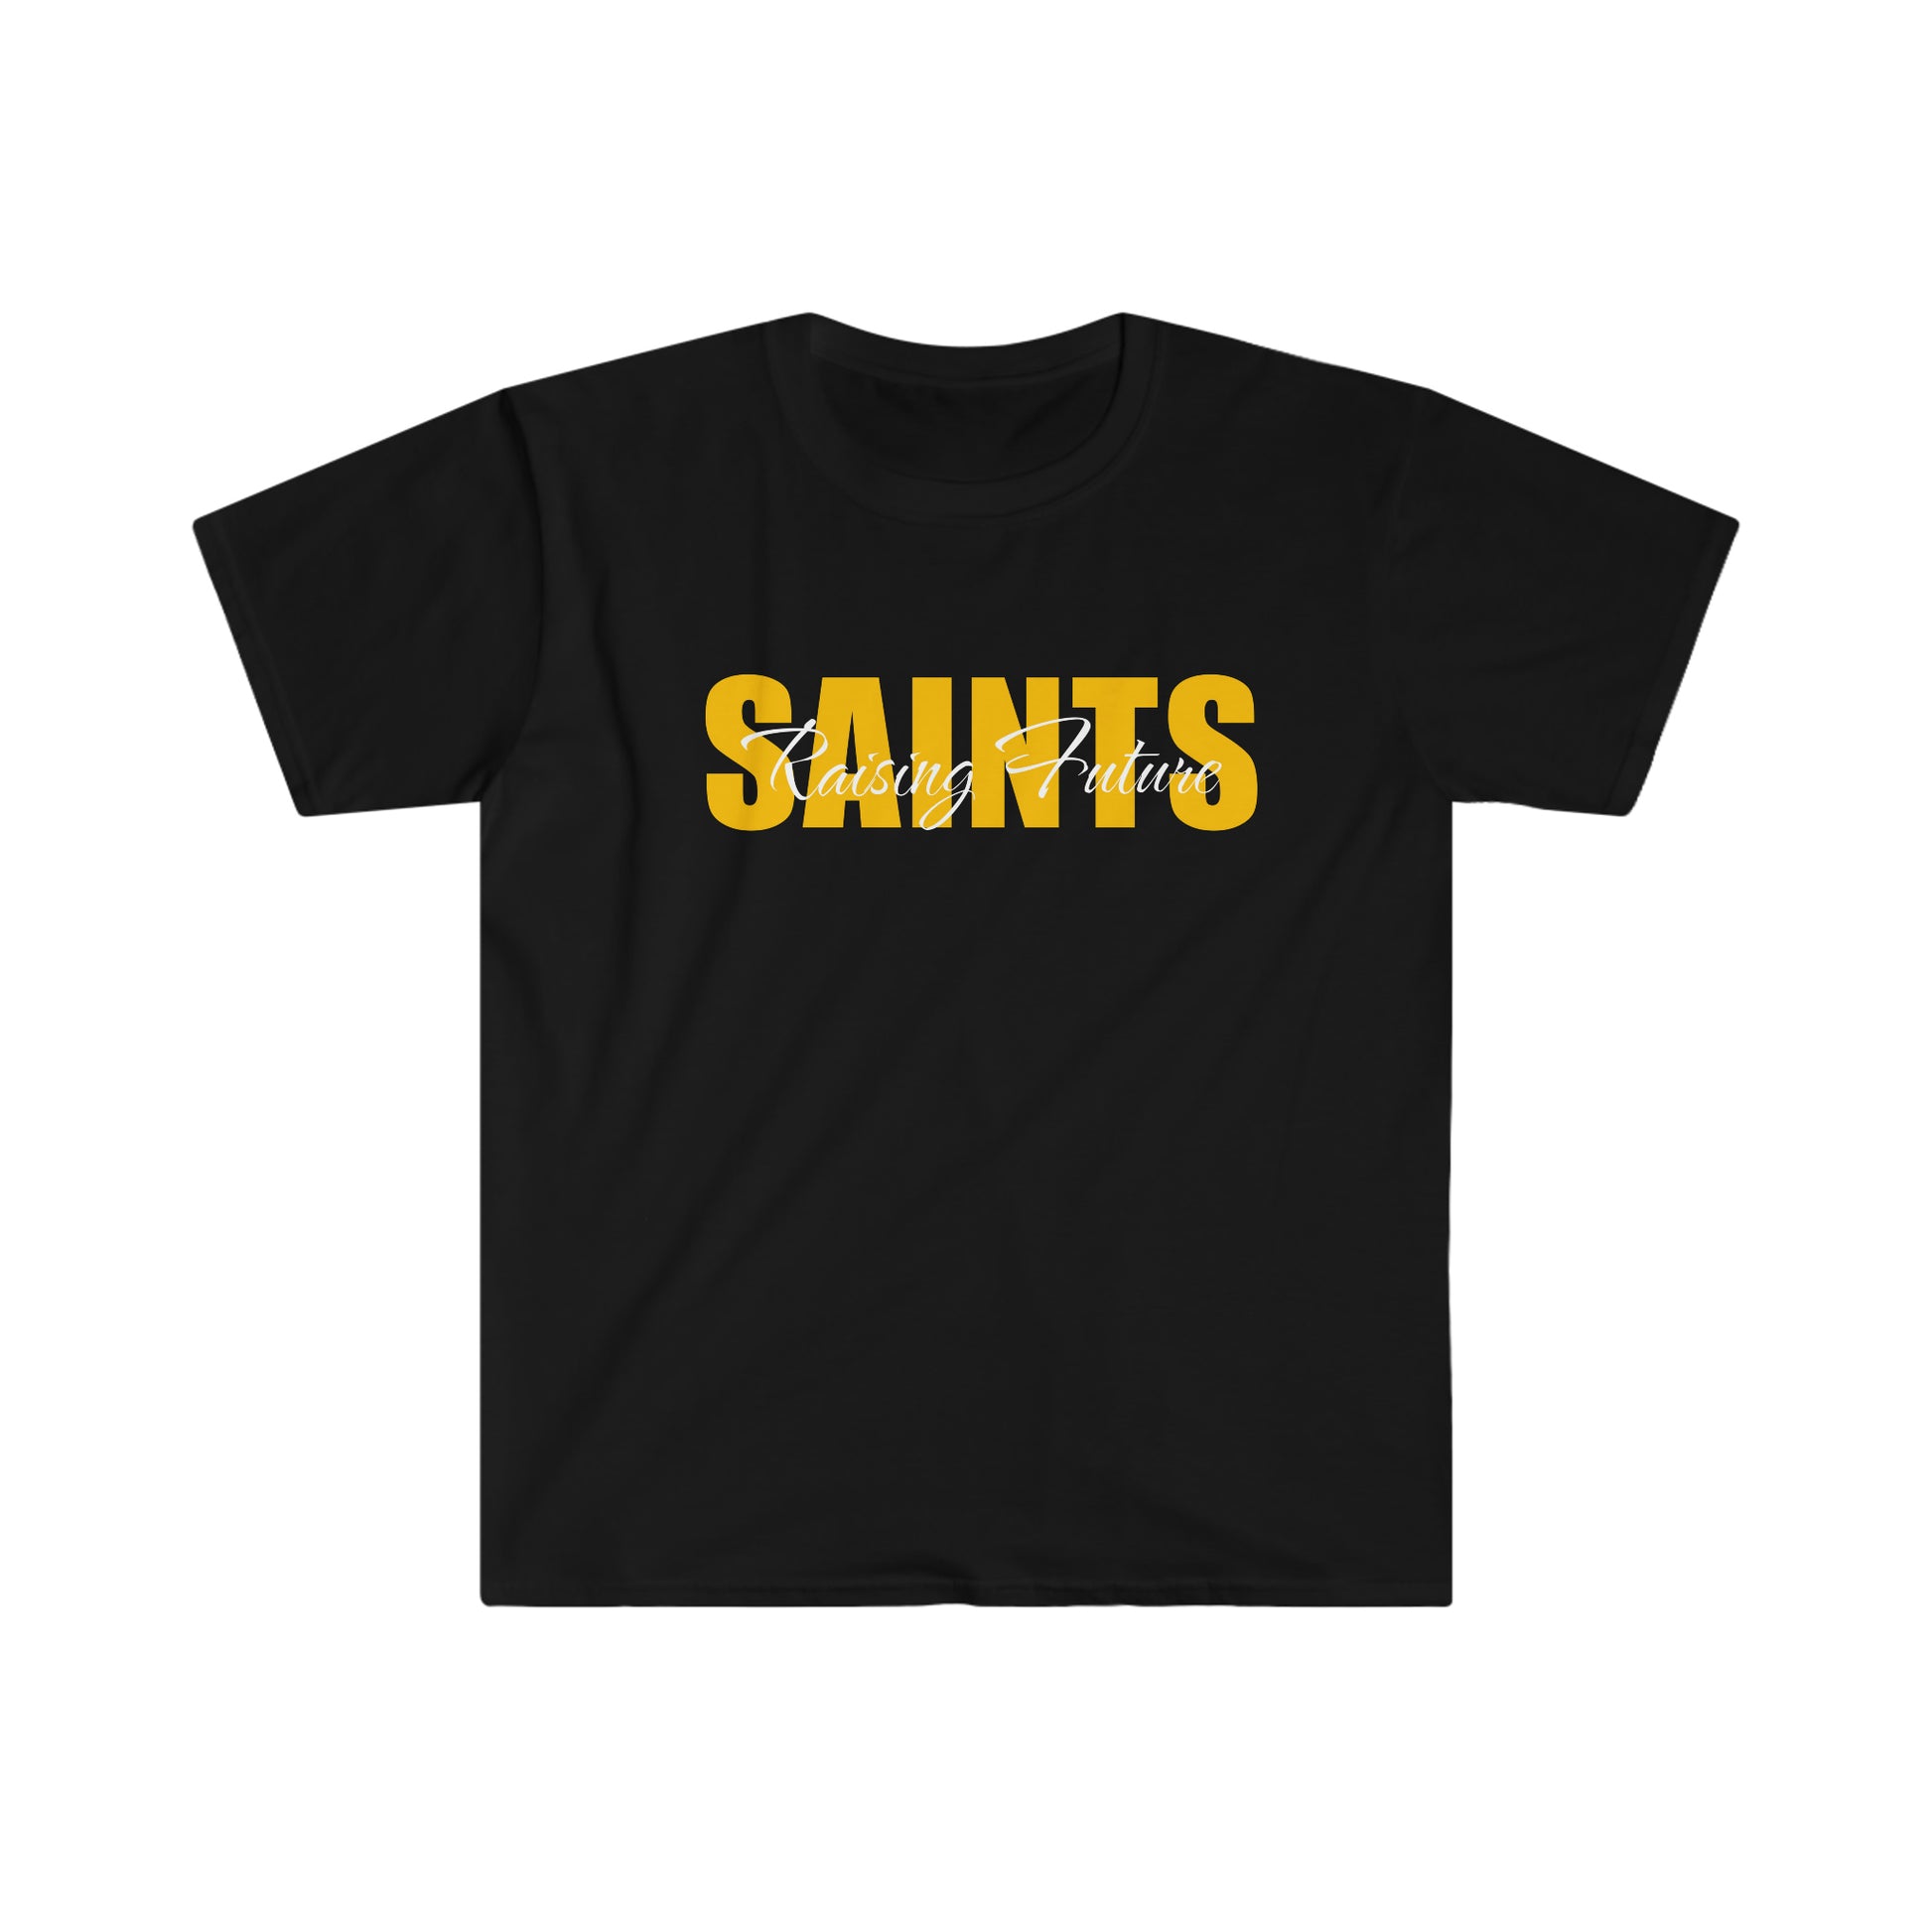 Black Gildan T-Shirt with "Raising Future Saints" printed on it in yellow and white font.